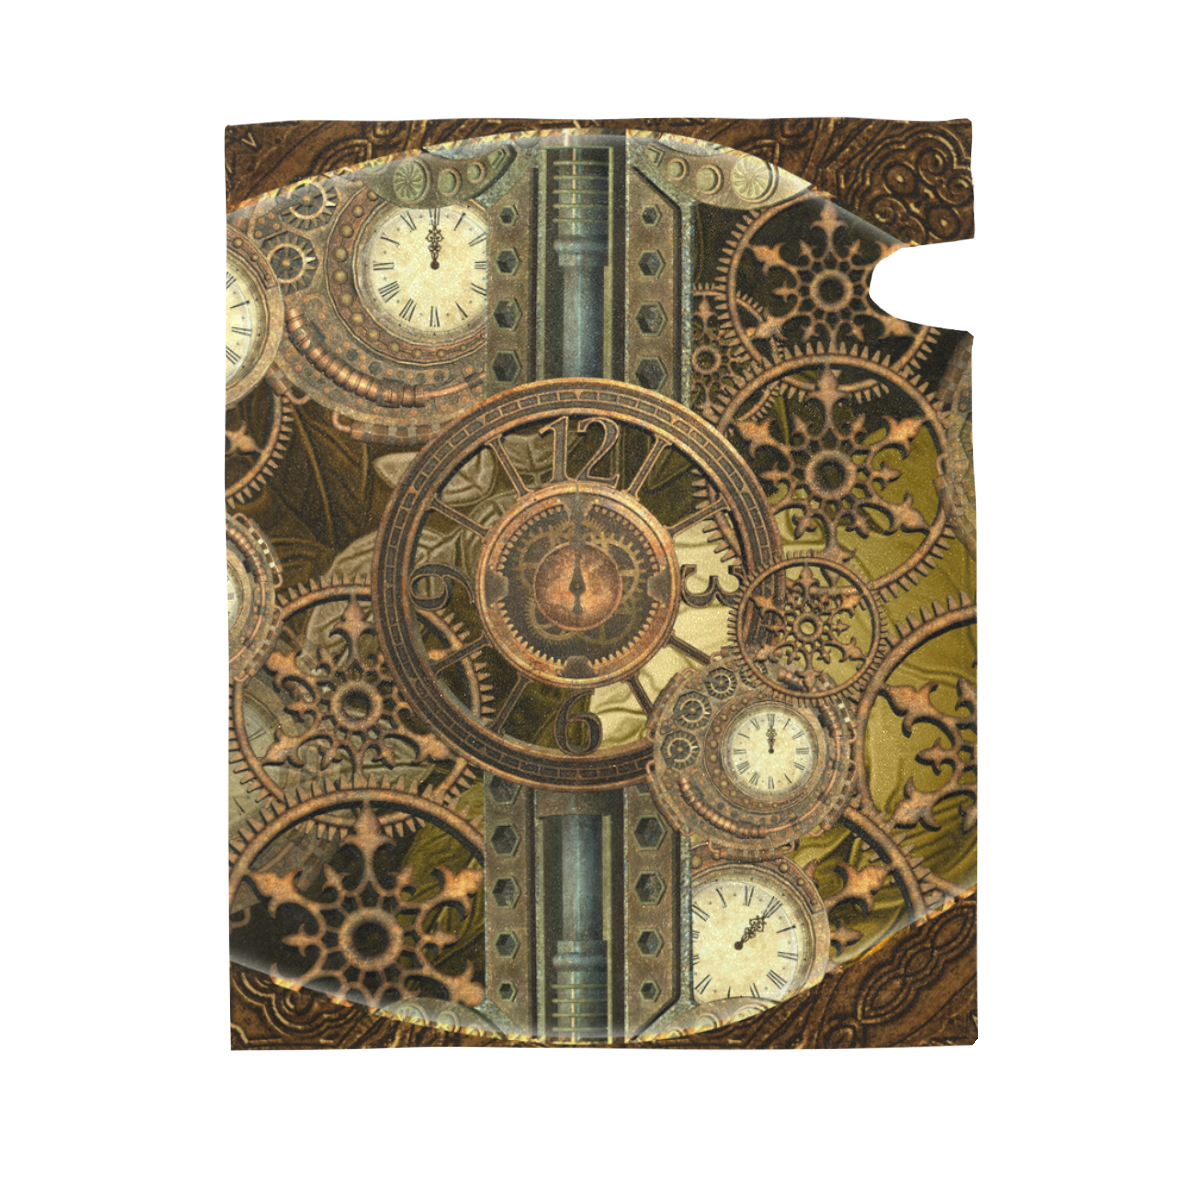 Steampunk clocks and gears Mailbox Cover